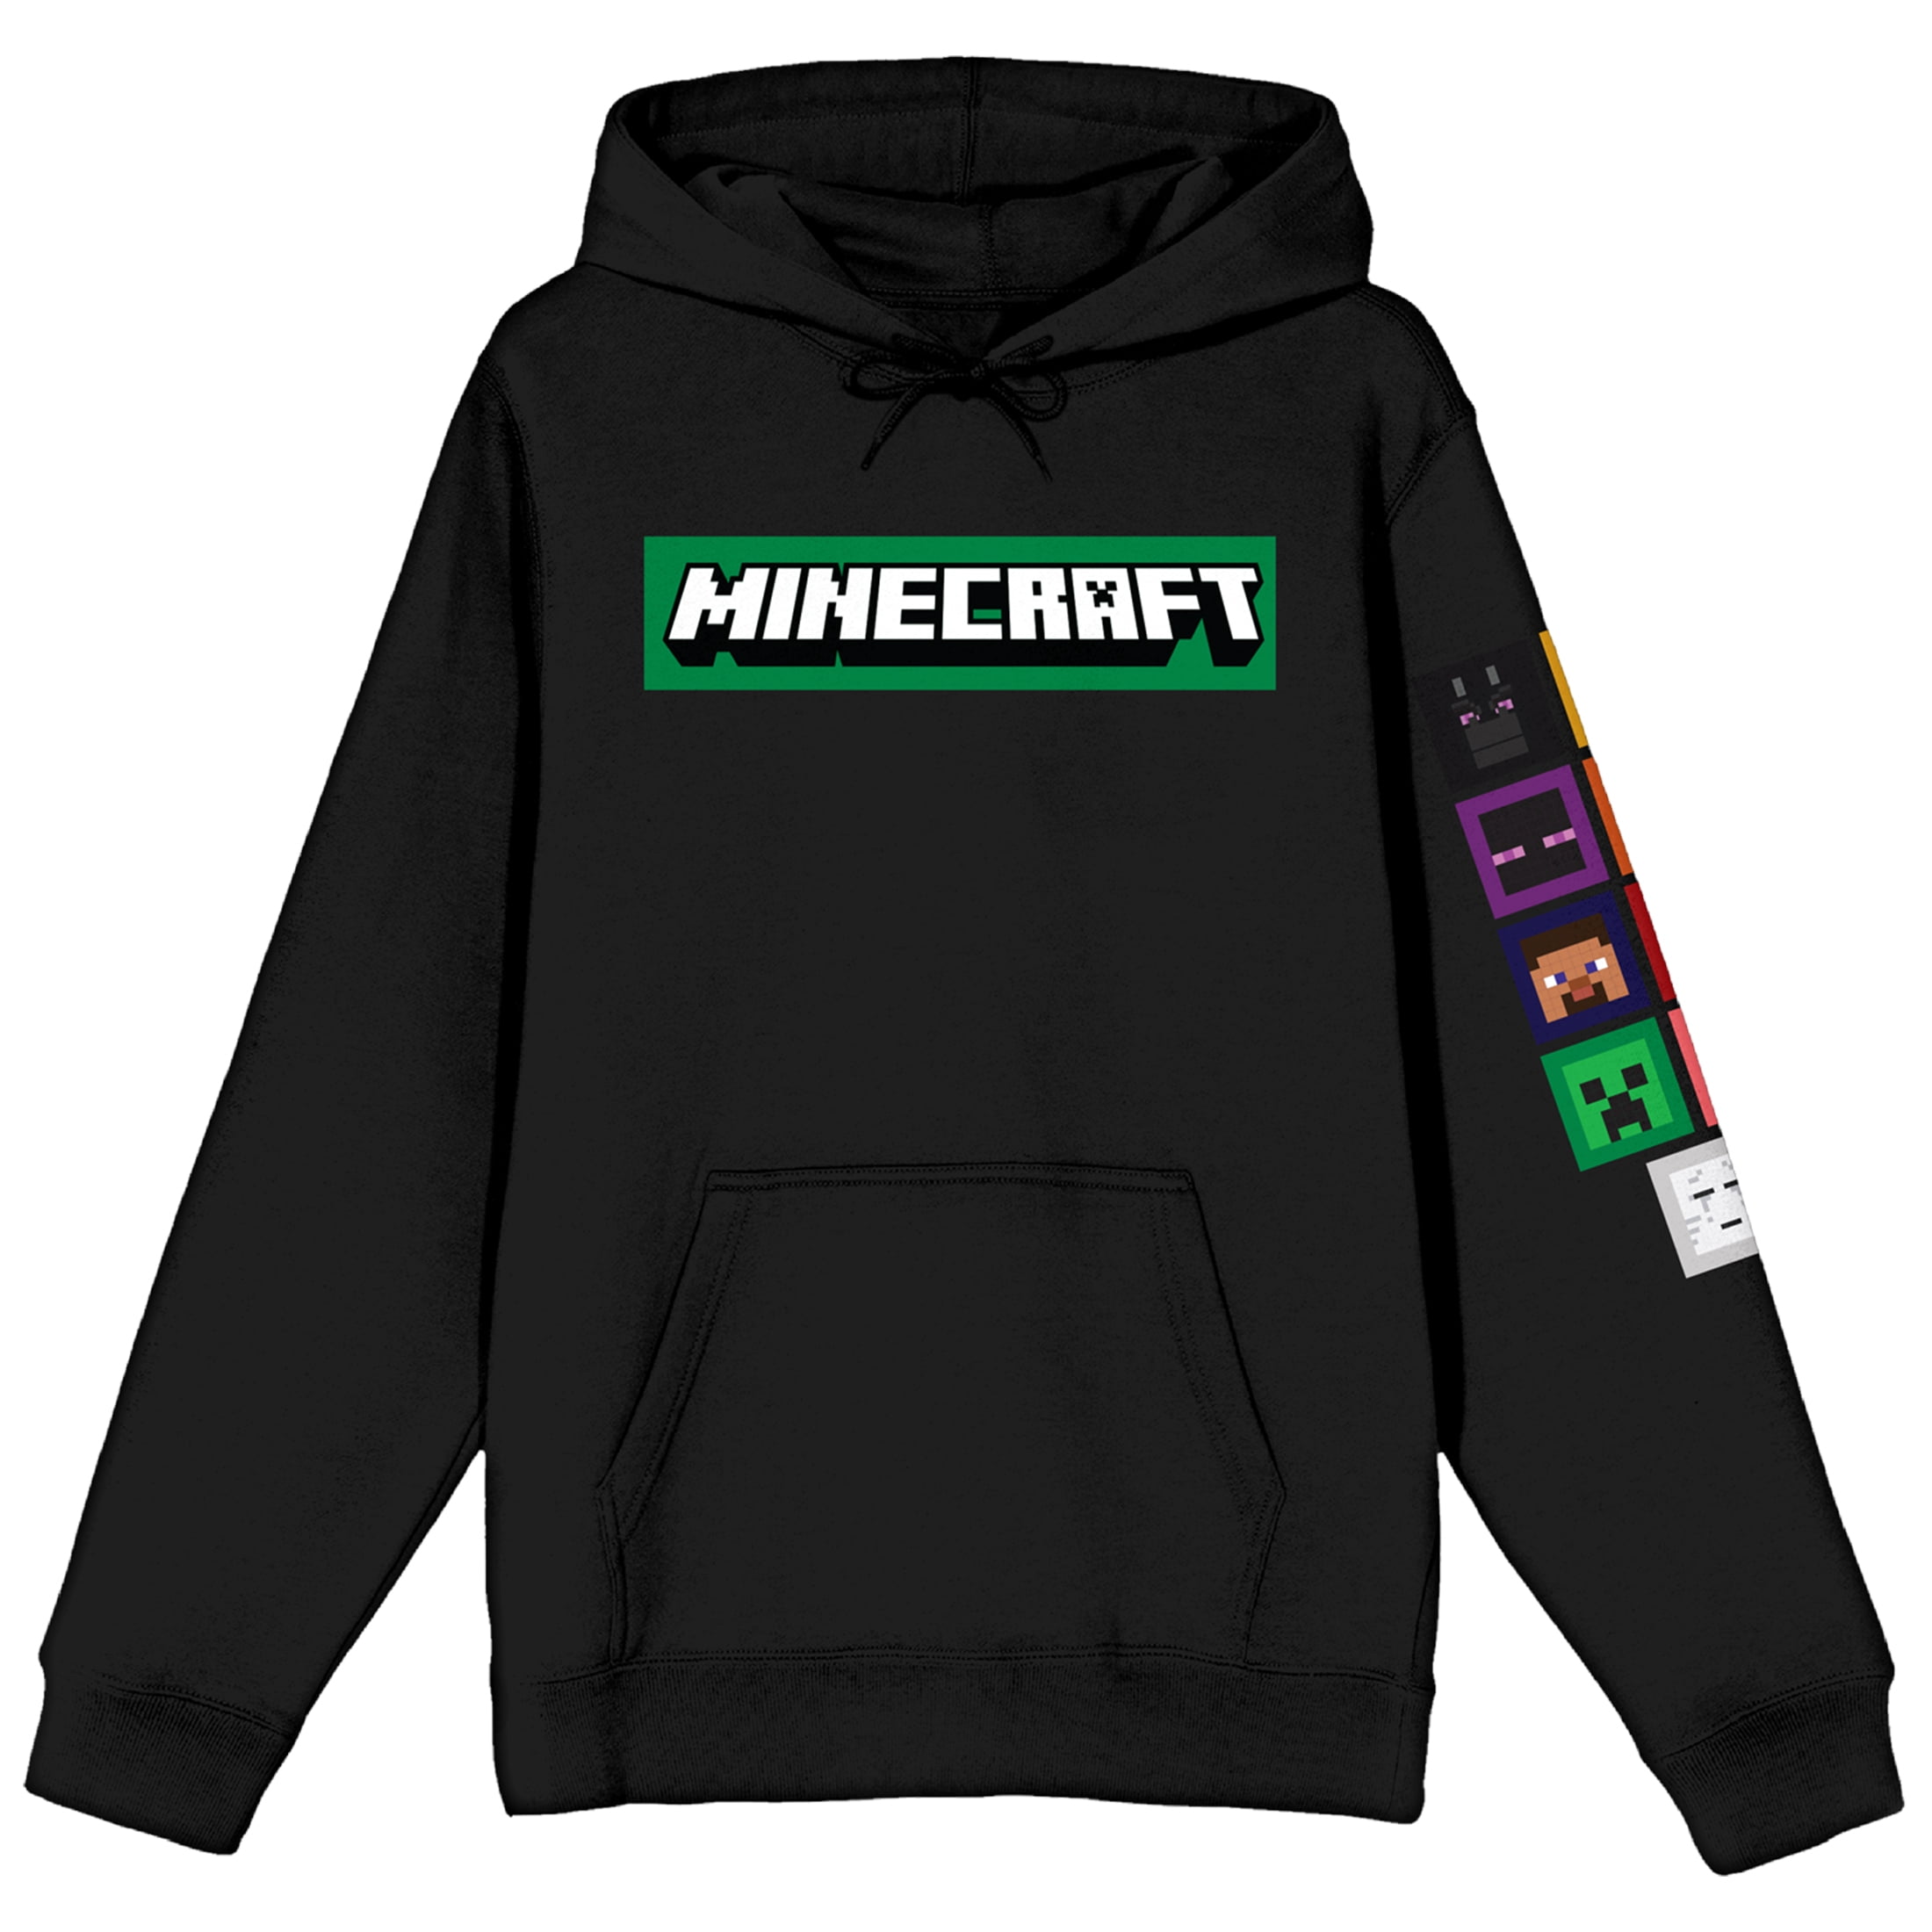 Minecraft Pixel Art and Logo Adult Black Graphic Adult Hoodie-3XL ...